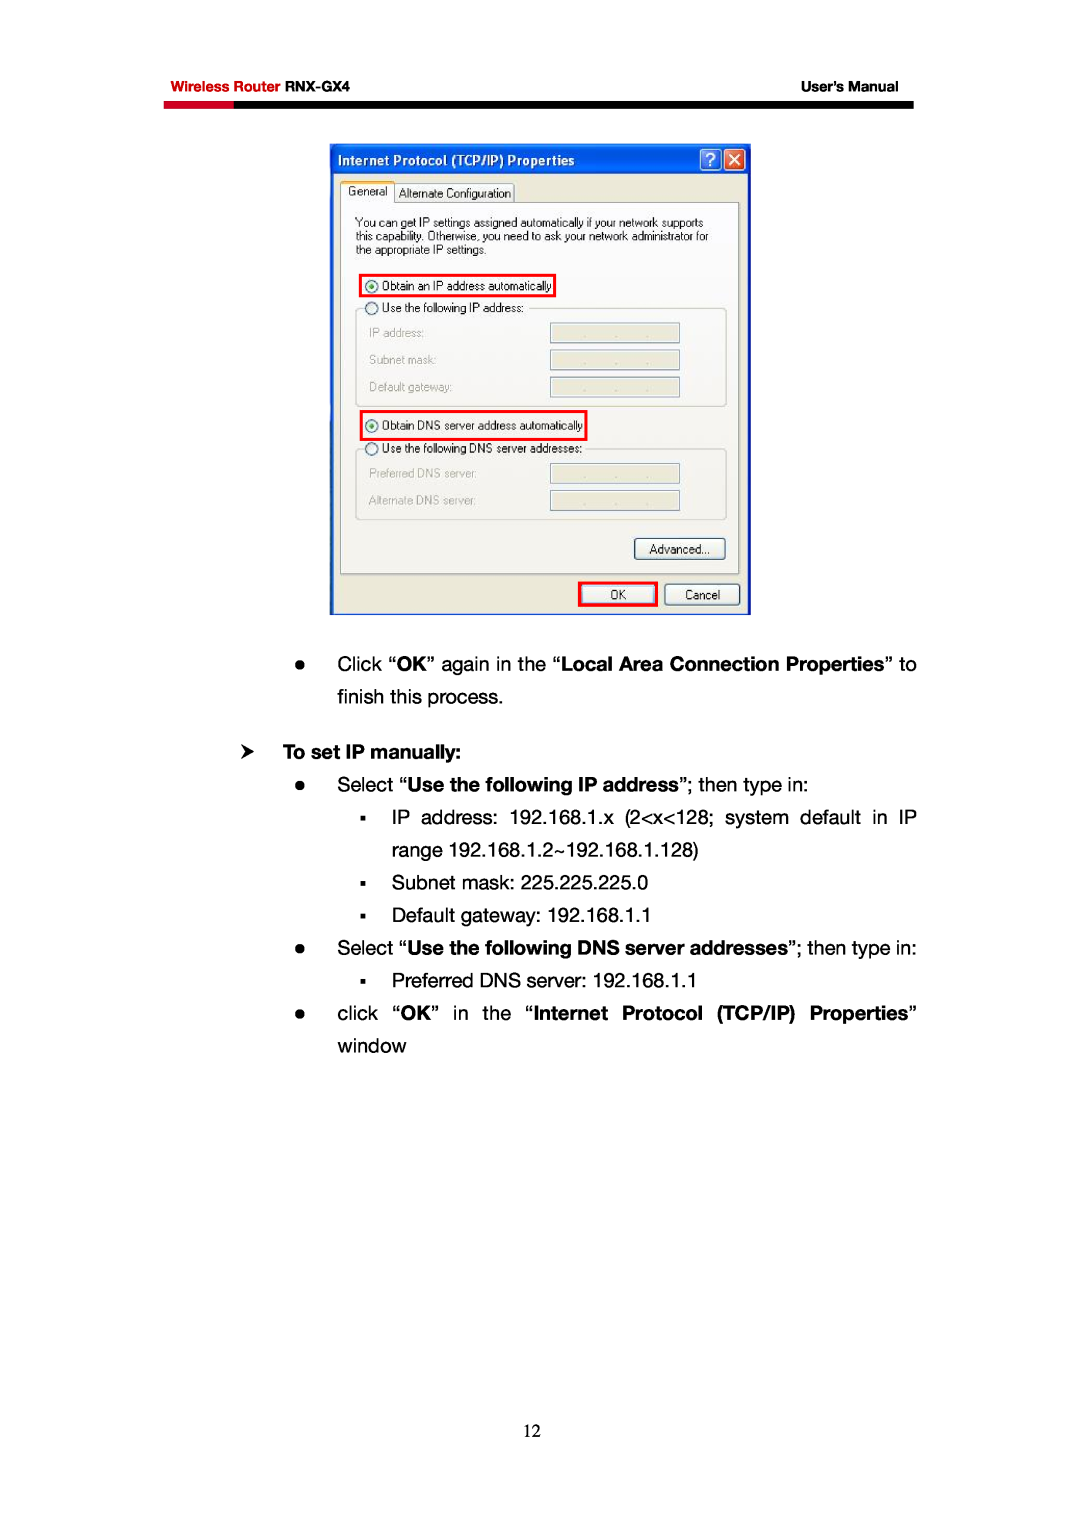 Rosewill RNX-GX4 user manual h To set IP manually, z Select “Use the following IP address” then type in 